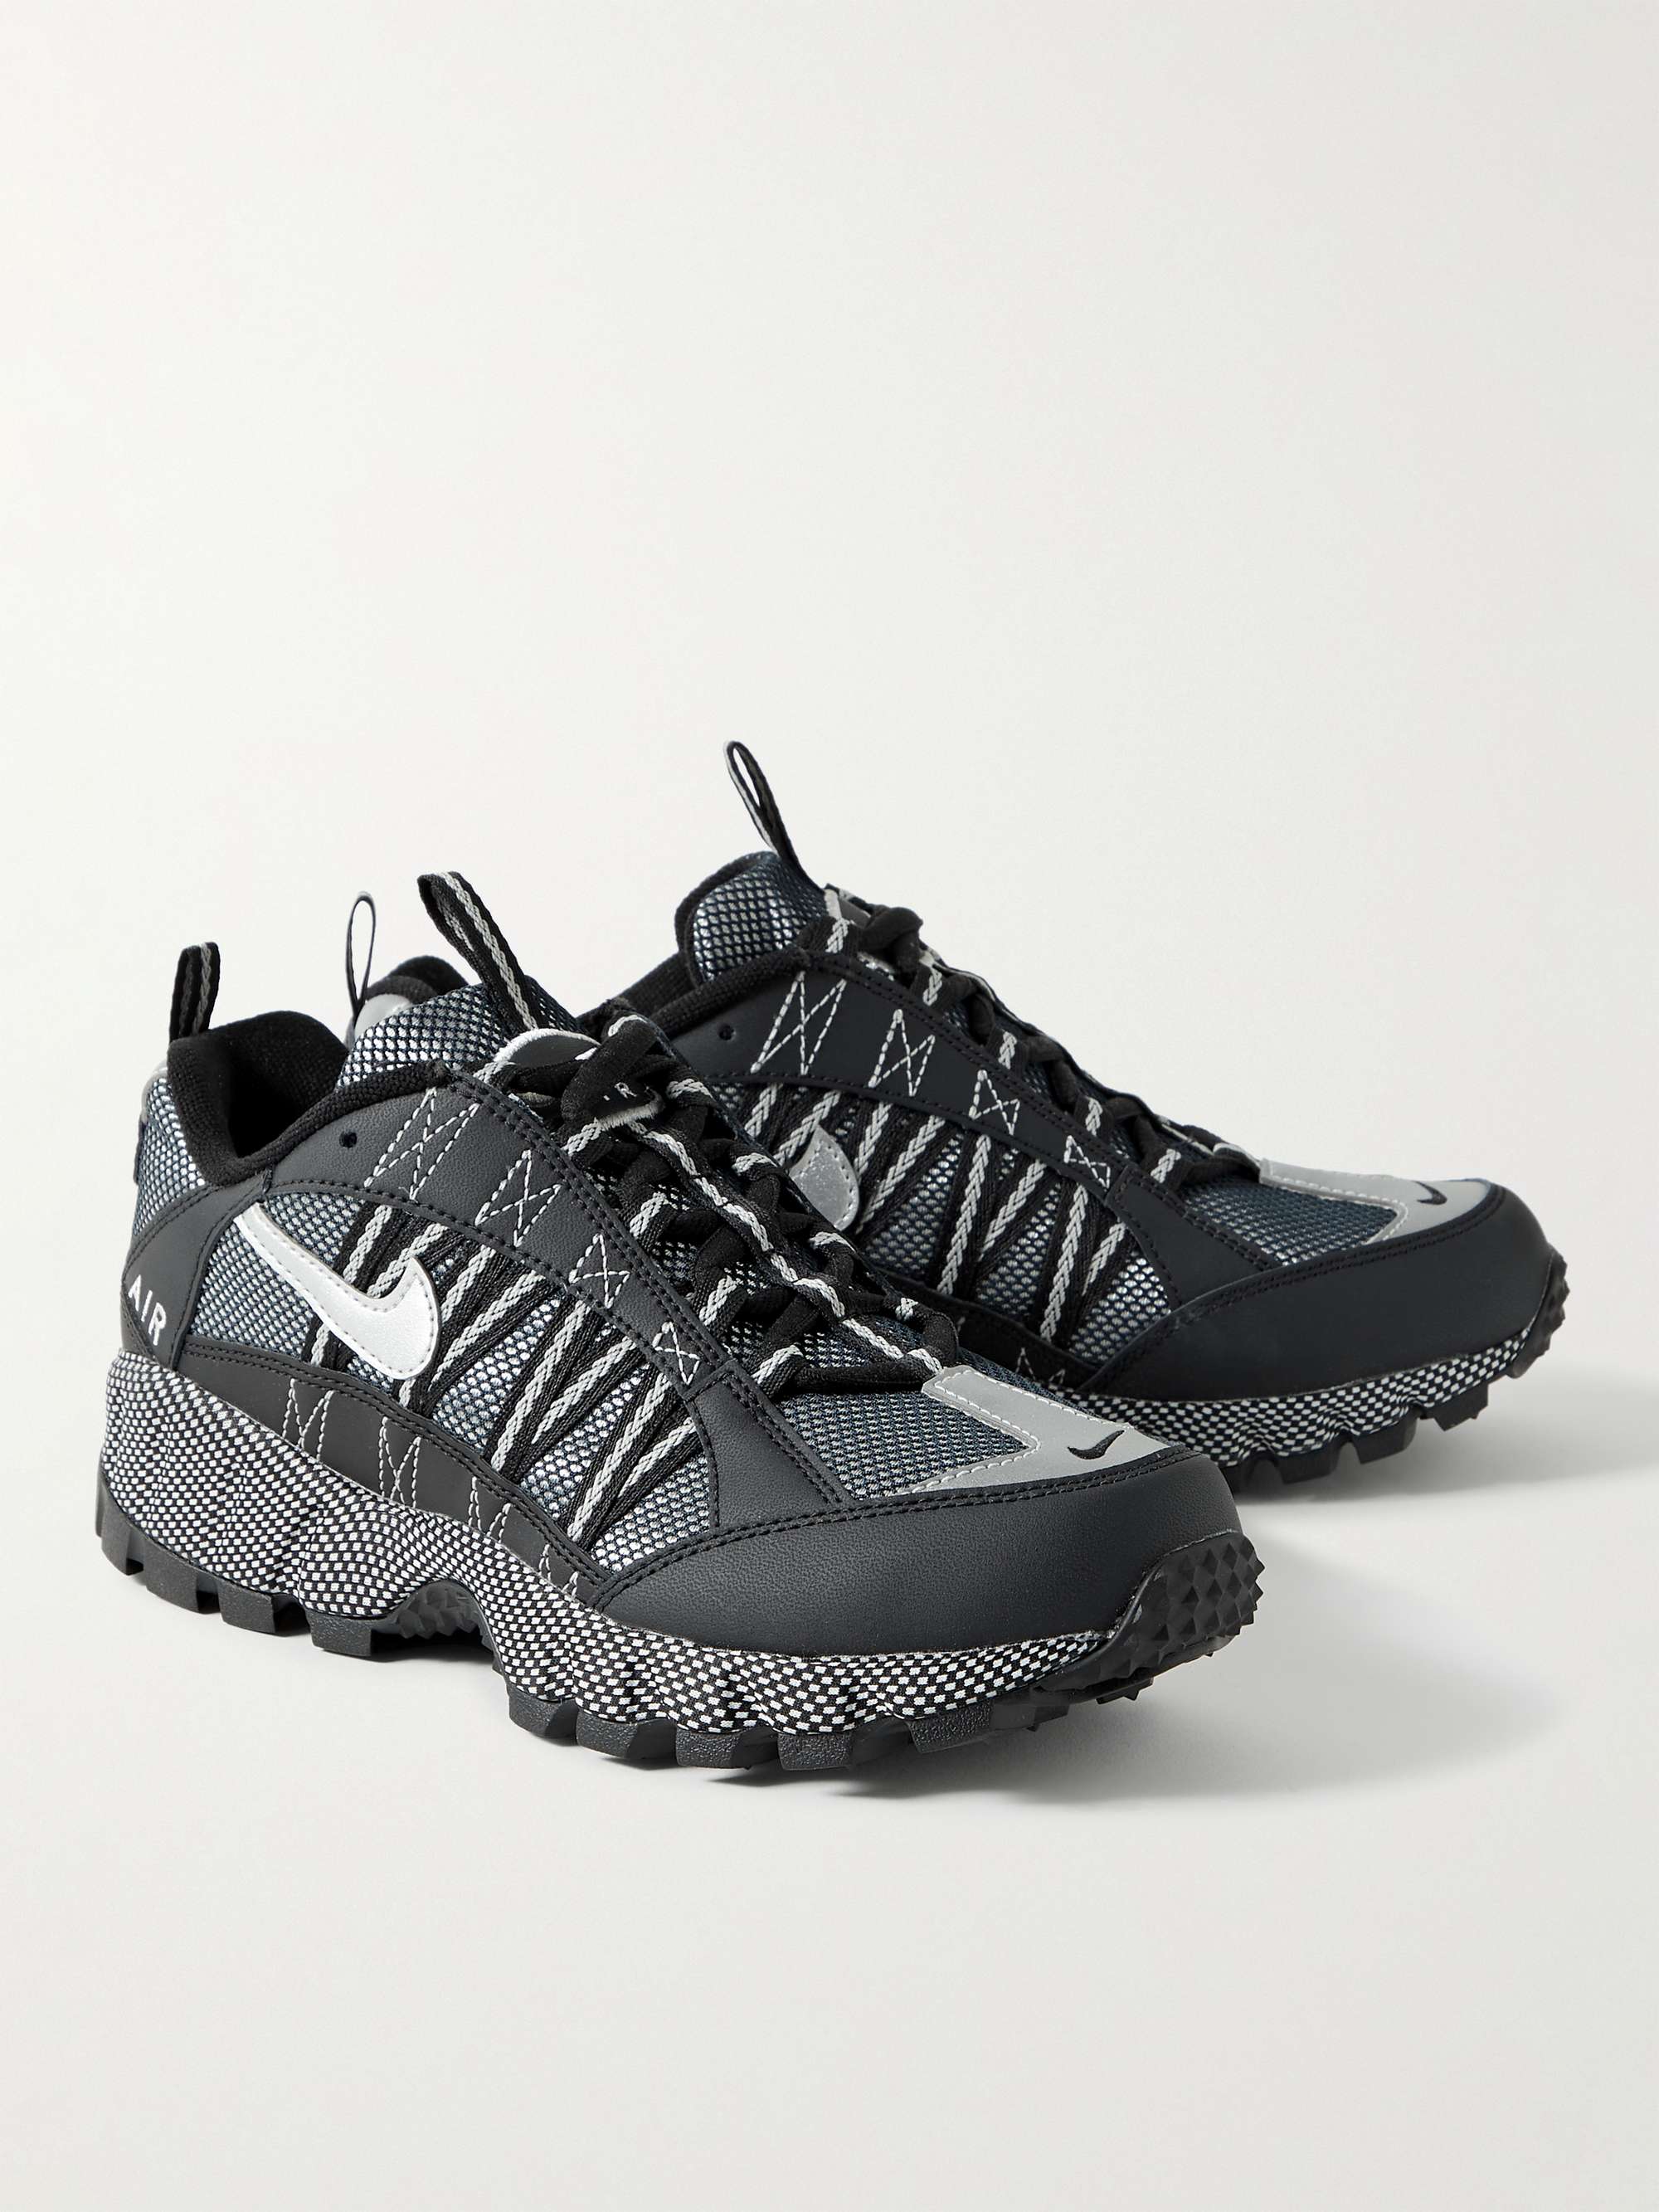 NIKE Air Humara QS Leather-Trimmed Mesh Sneakers | MR PORTER